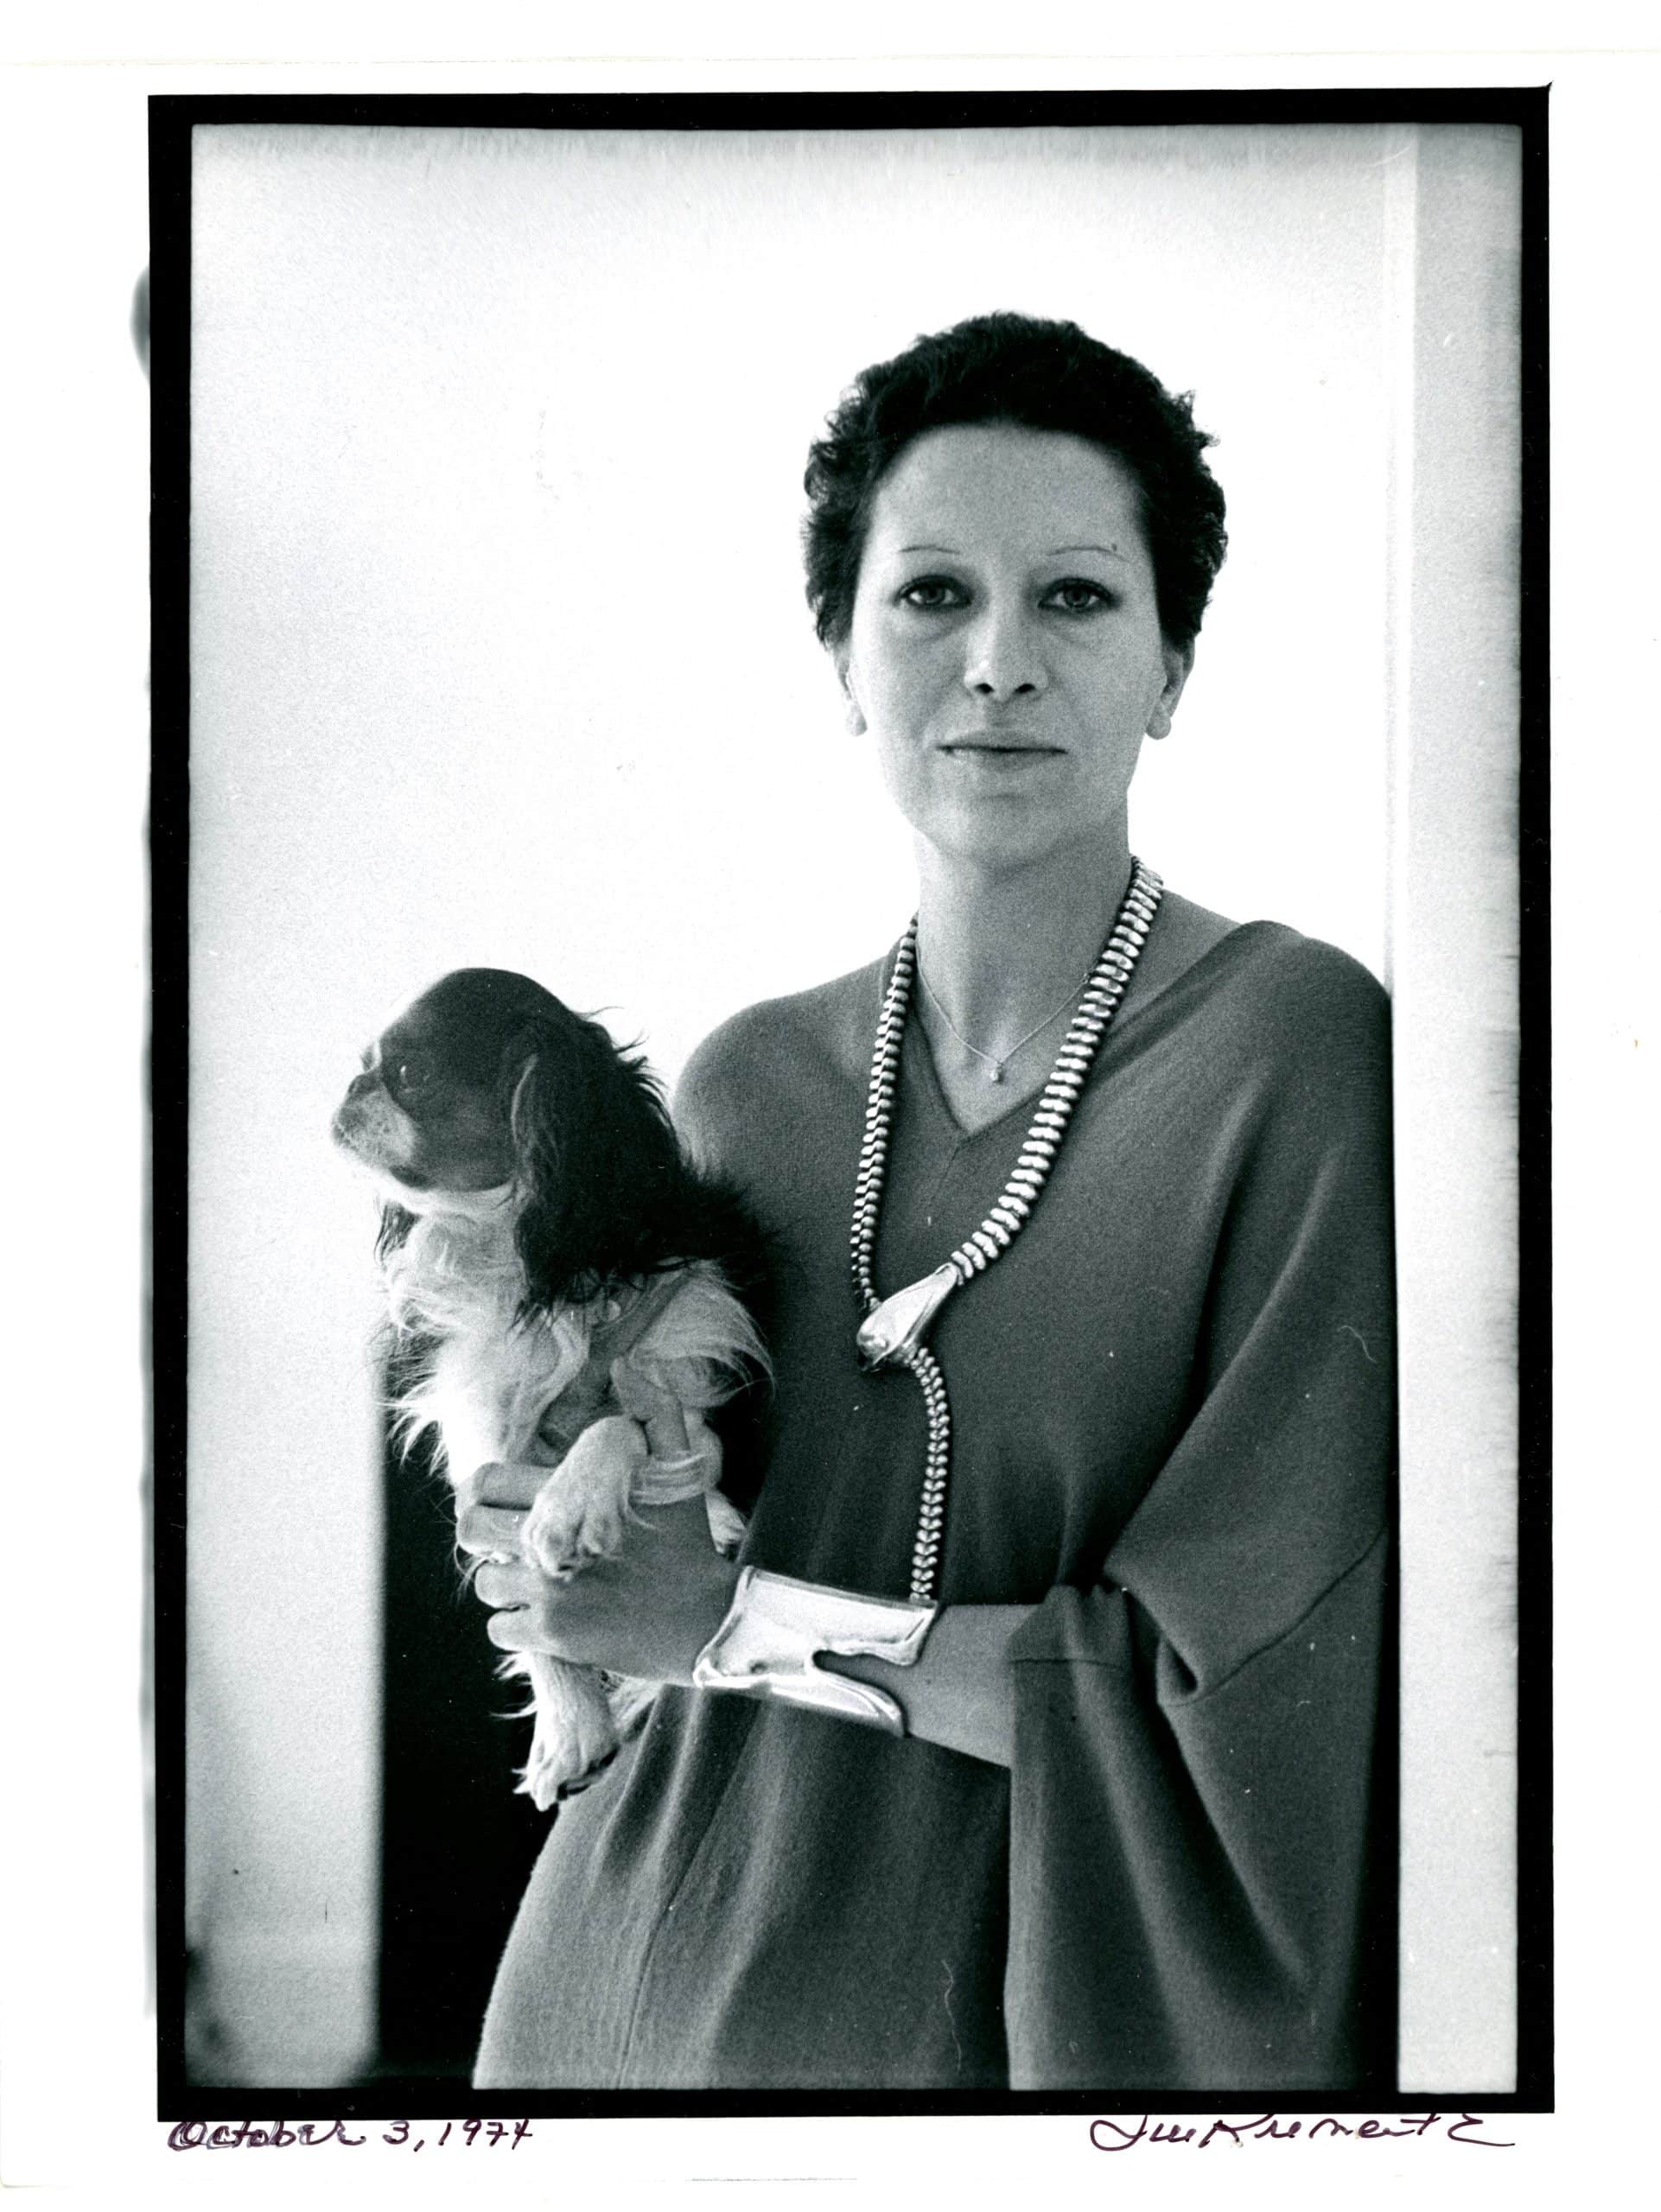 Reflections on Elsa Peretti, the Visionary Who Changed the Way We Wear Jewelry